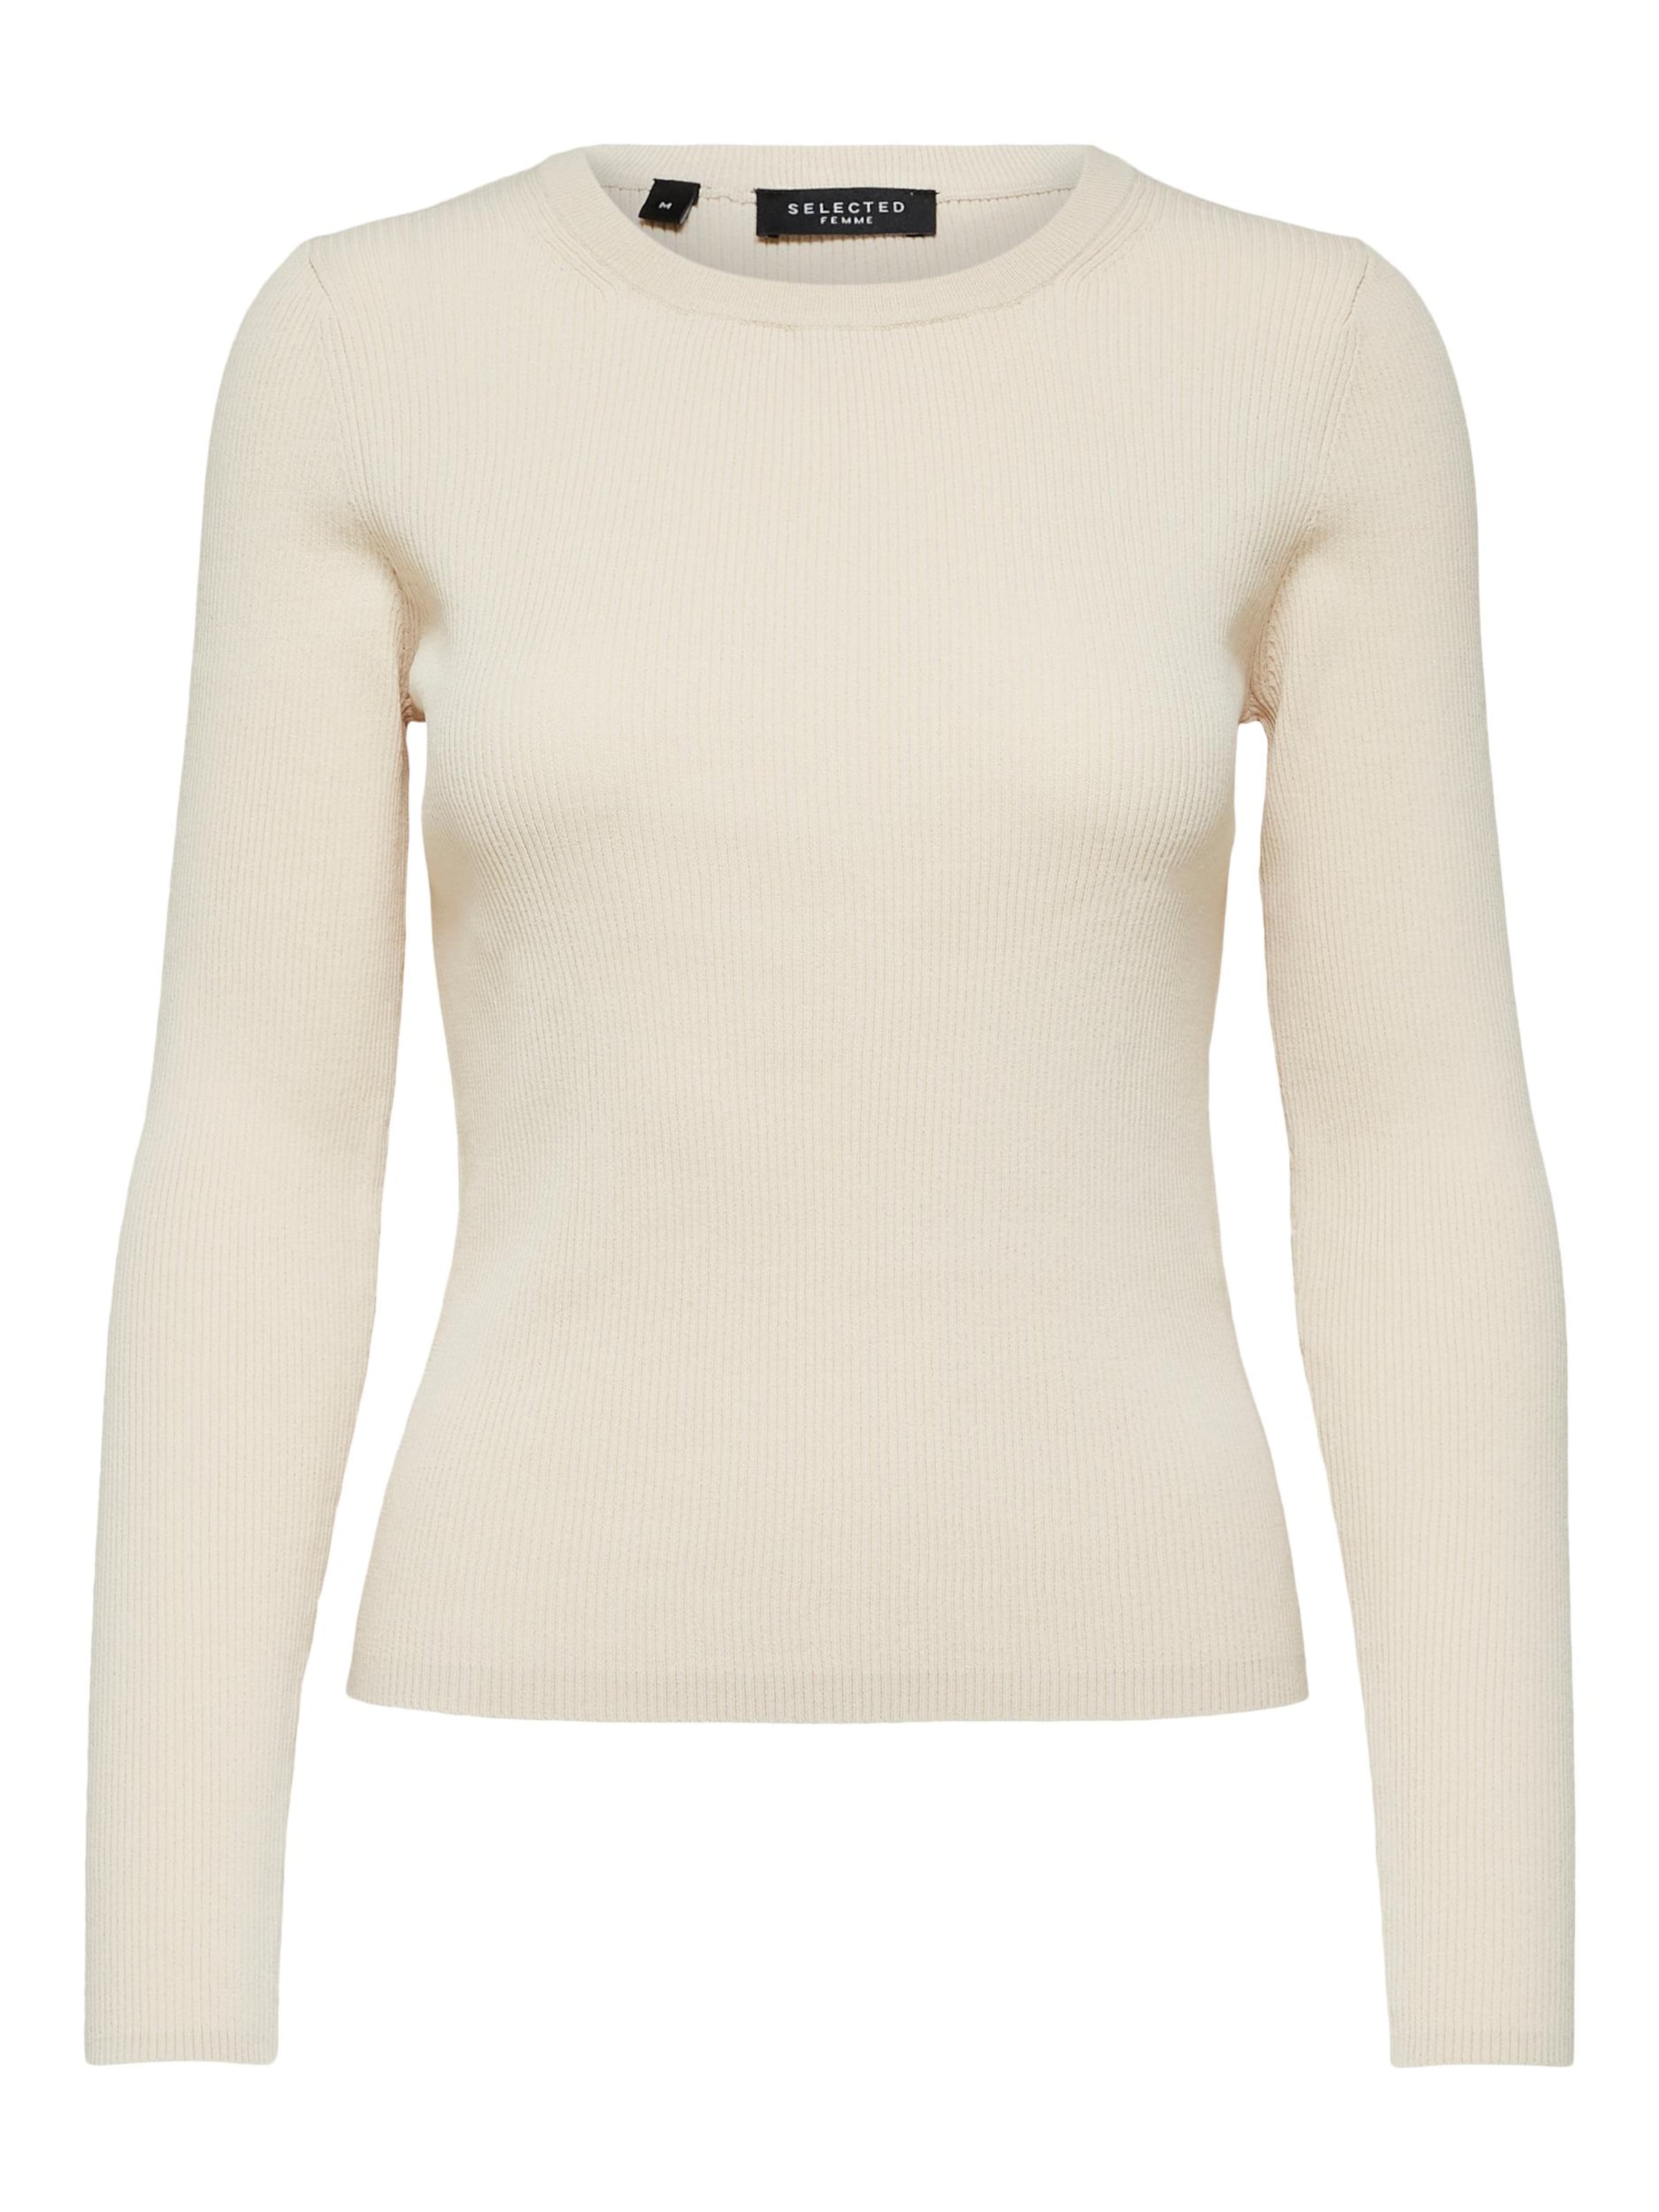 Selected Femme Pull-Over 'amelia' M Beige